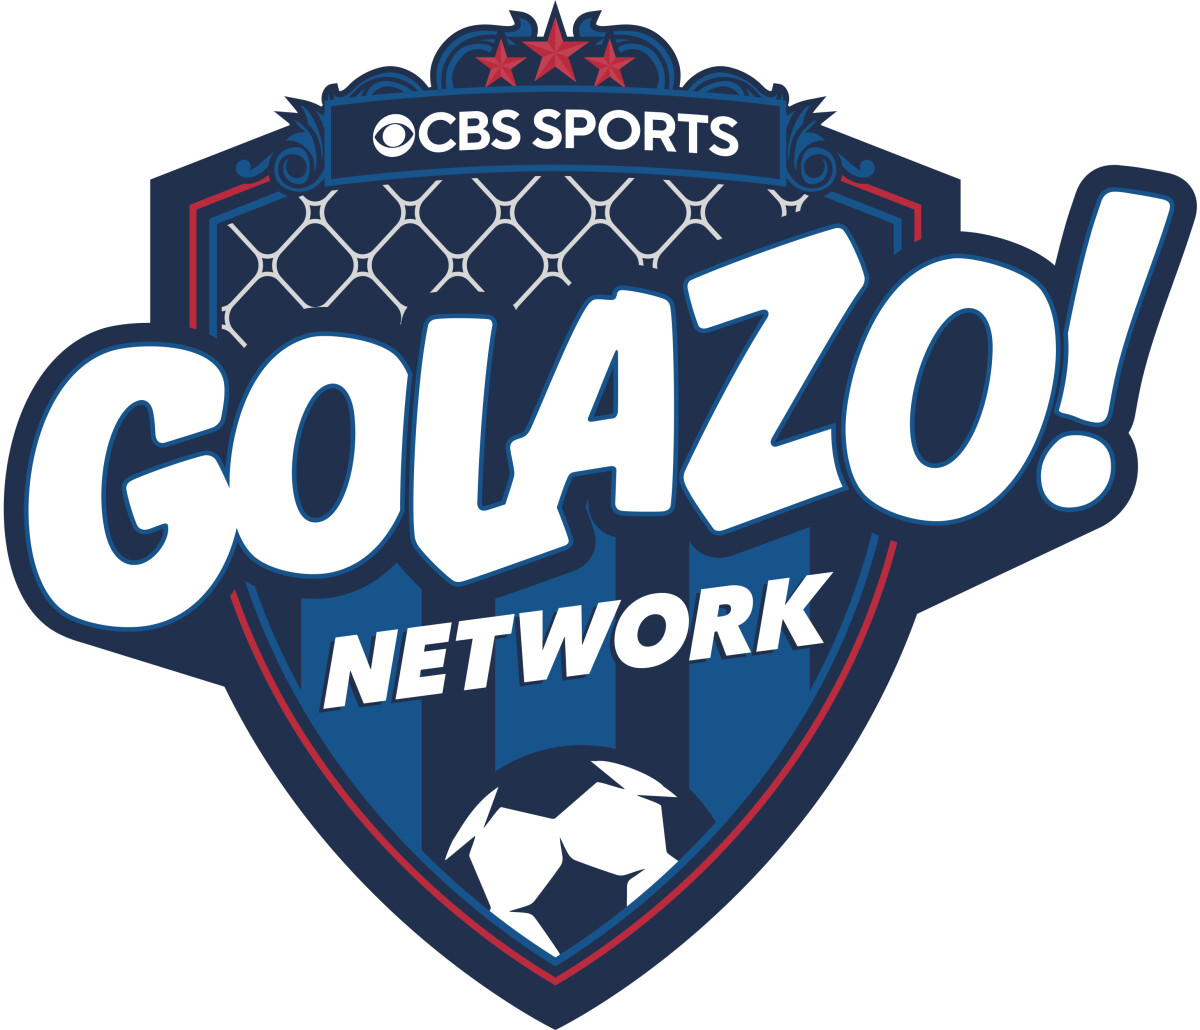 NickALive! CBS Sports Golazo Network to Launch April 11